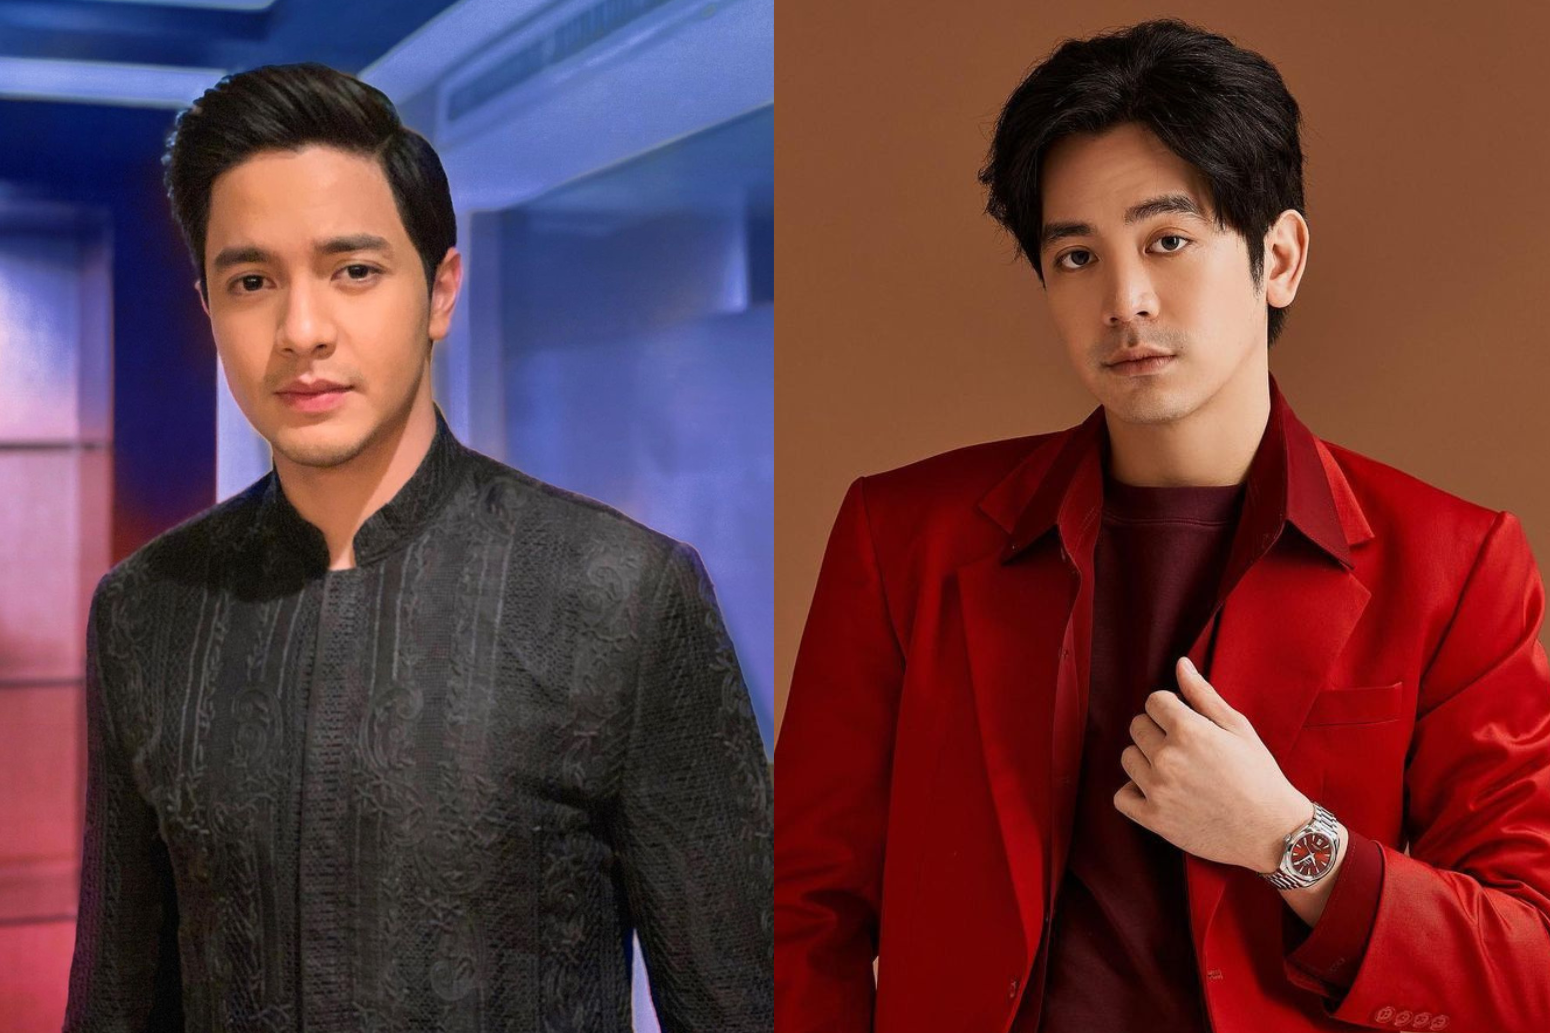 Alden Richards wants Joshua Garcia to star as himself in his life story